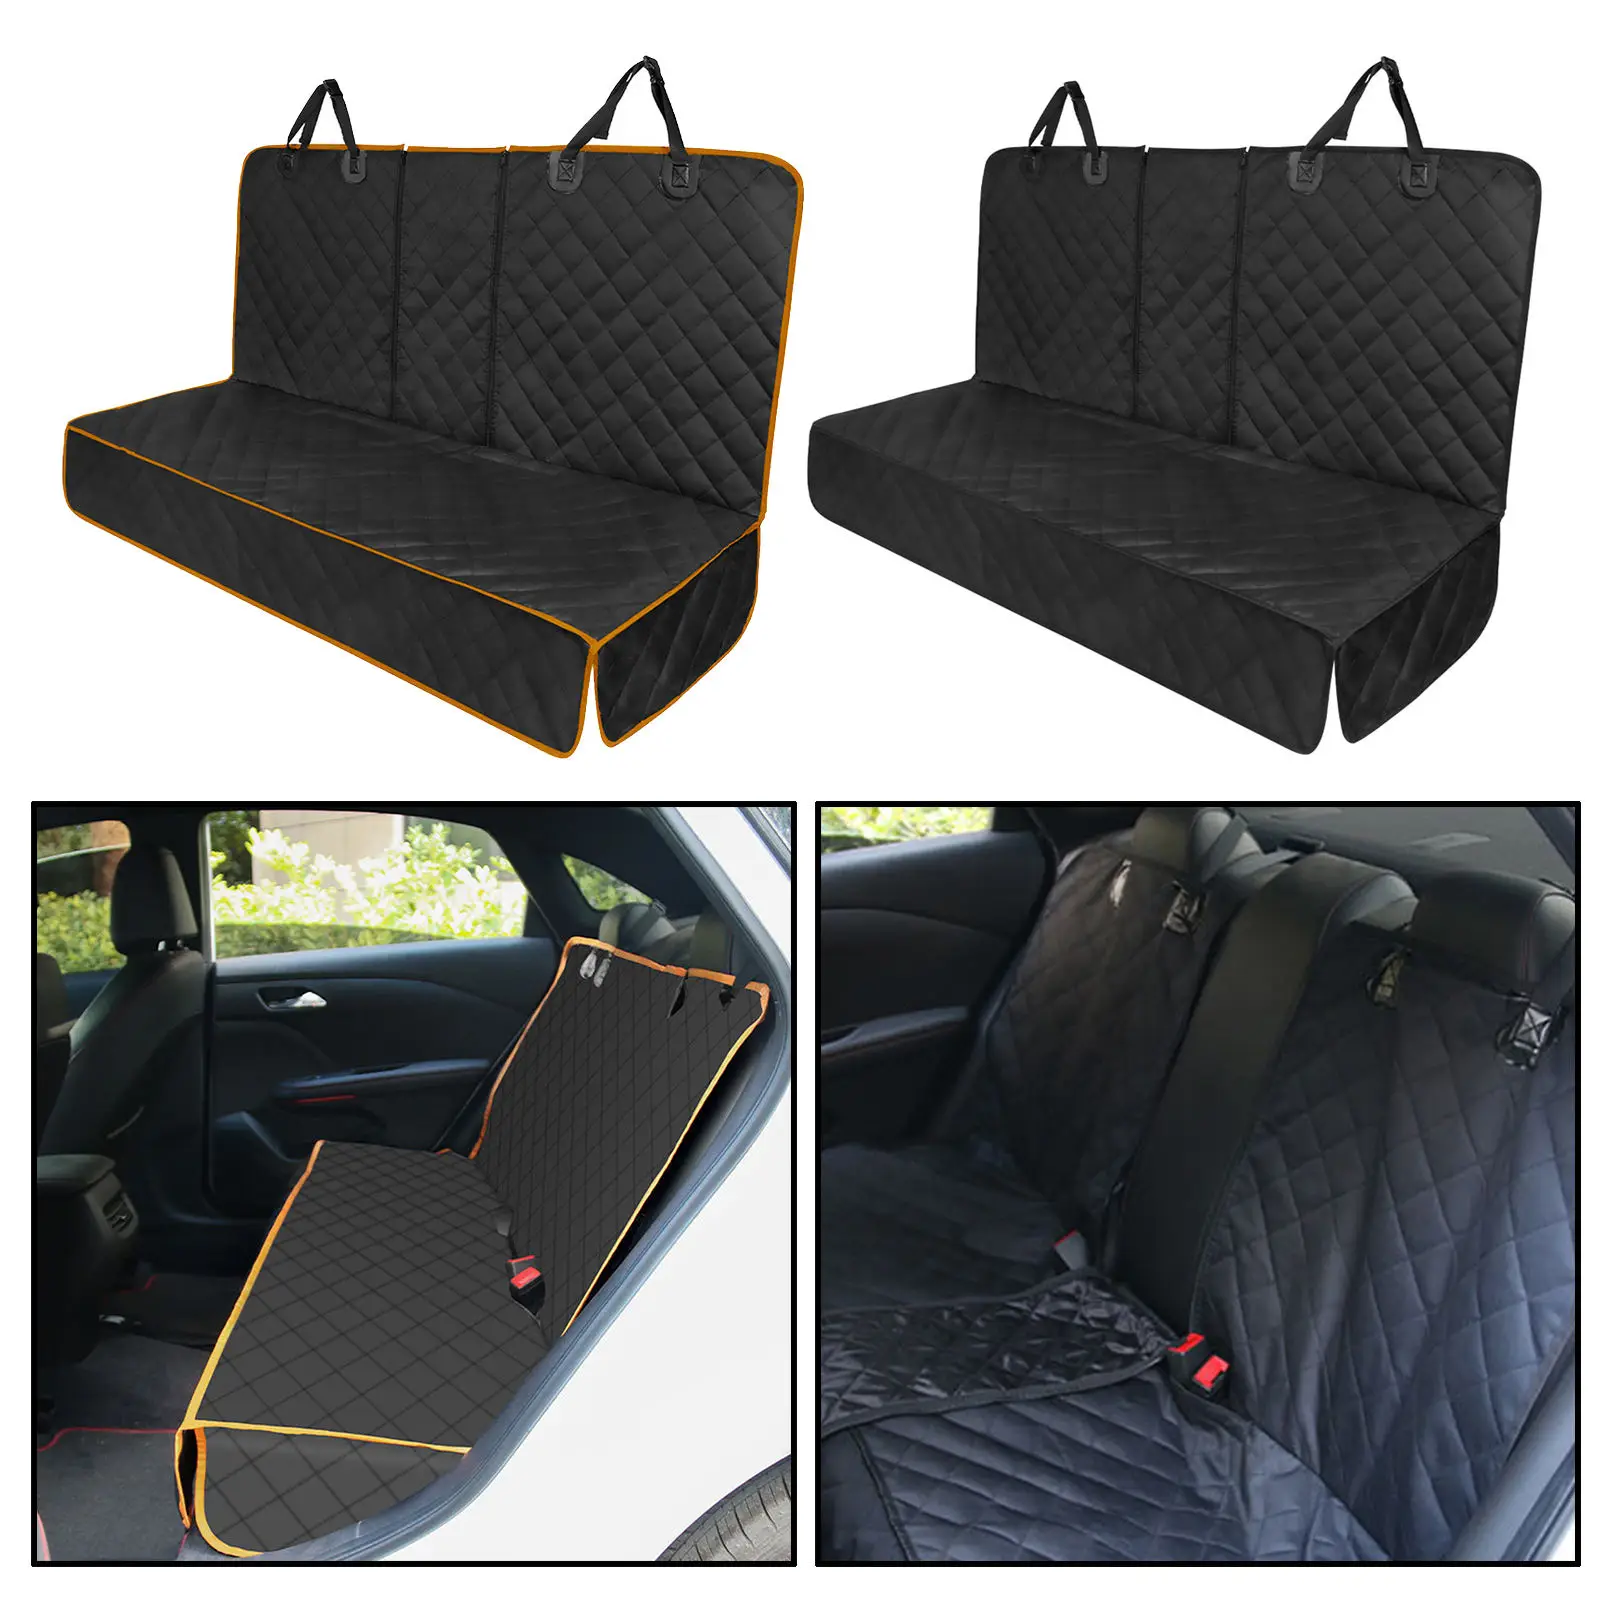 Bench Dog Car Seat Cover for Back Seat, Dog Car Seat Covers, Heavy-Duty & Nonslip Back Seat Cover for Dogs,Pet Car Seat Cover